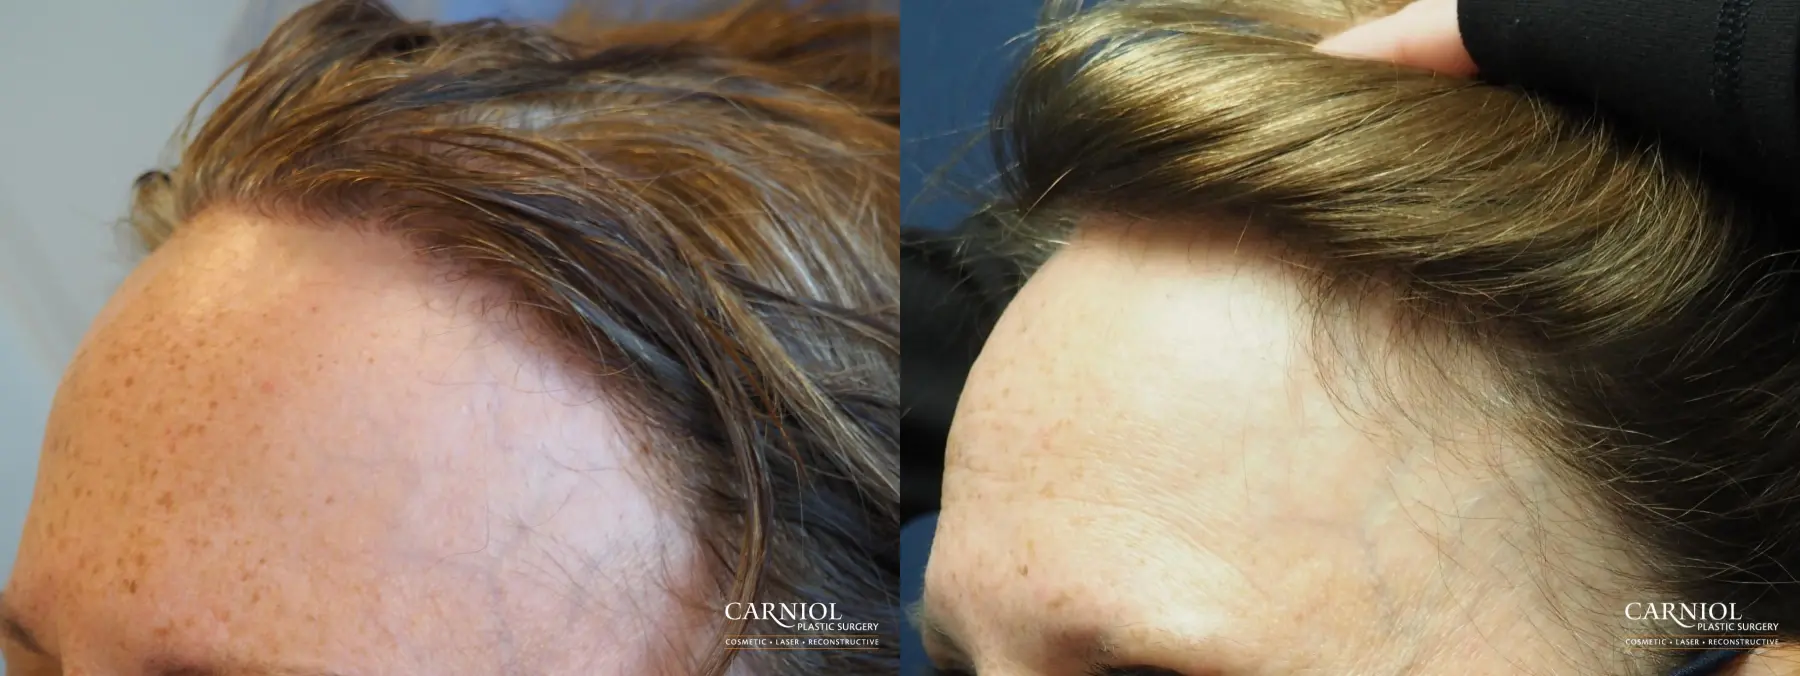 Nonsurgical Hair Restoration: Patient 1 - Before and After 3